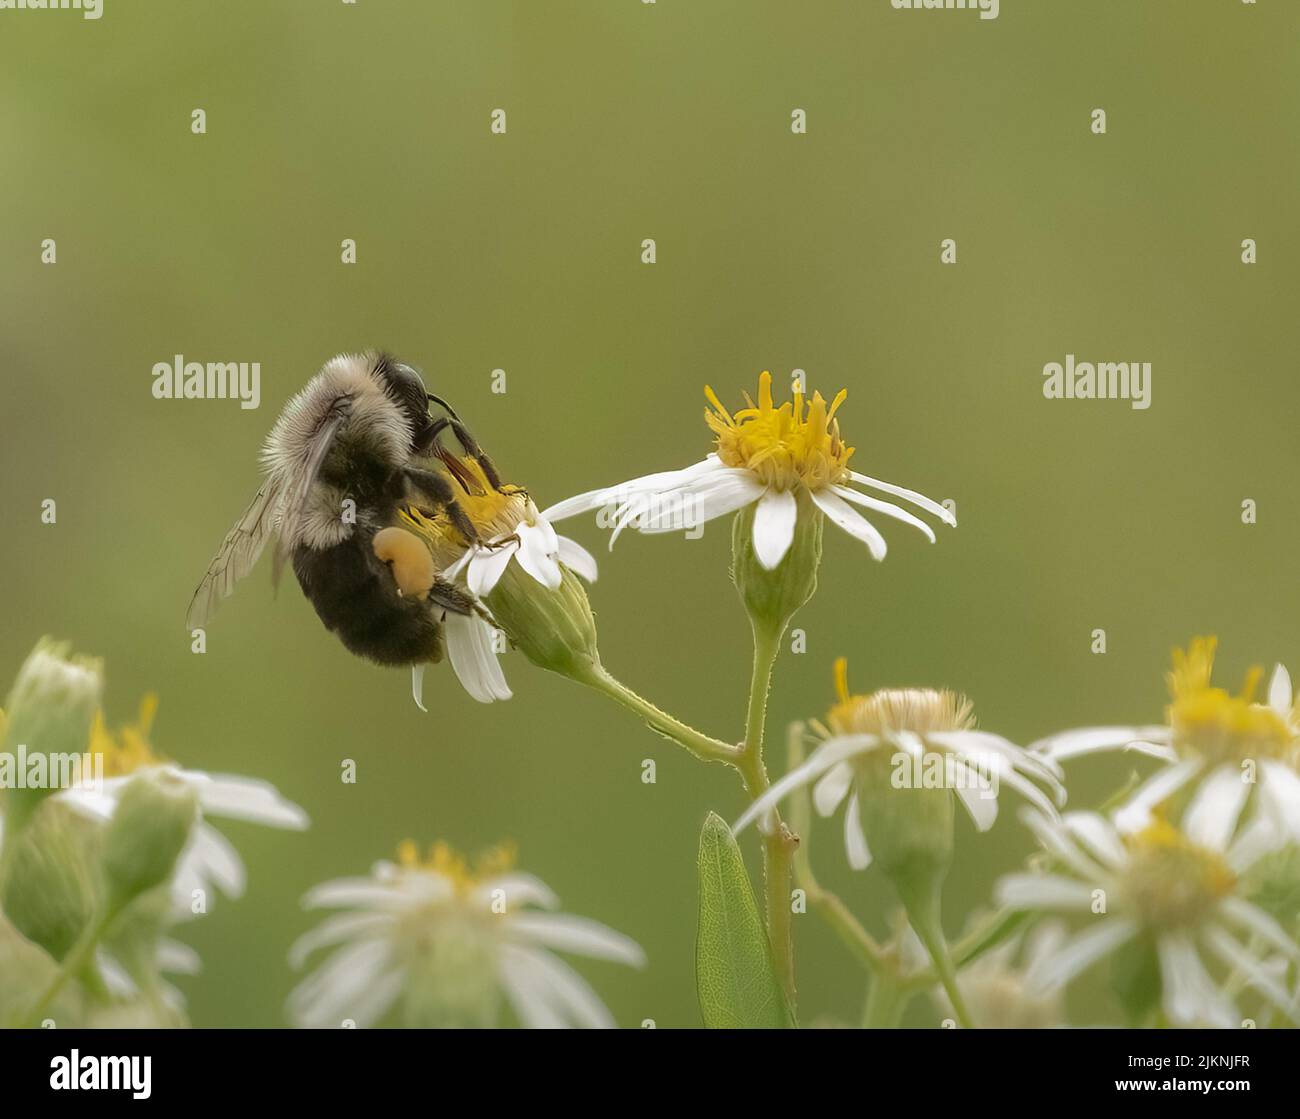 A Bumblebee on a flower with soft green background Stock Photo